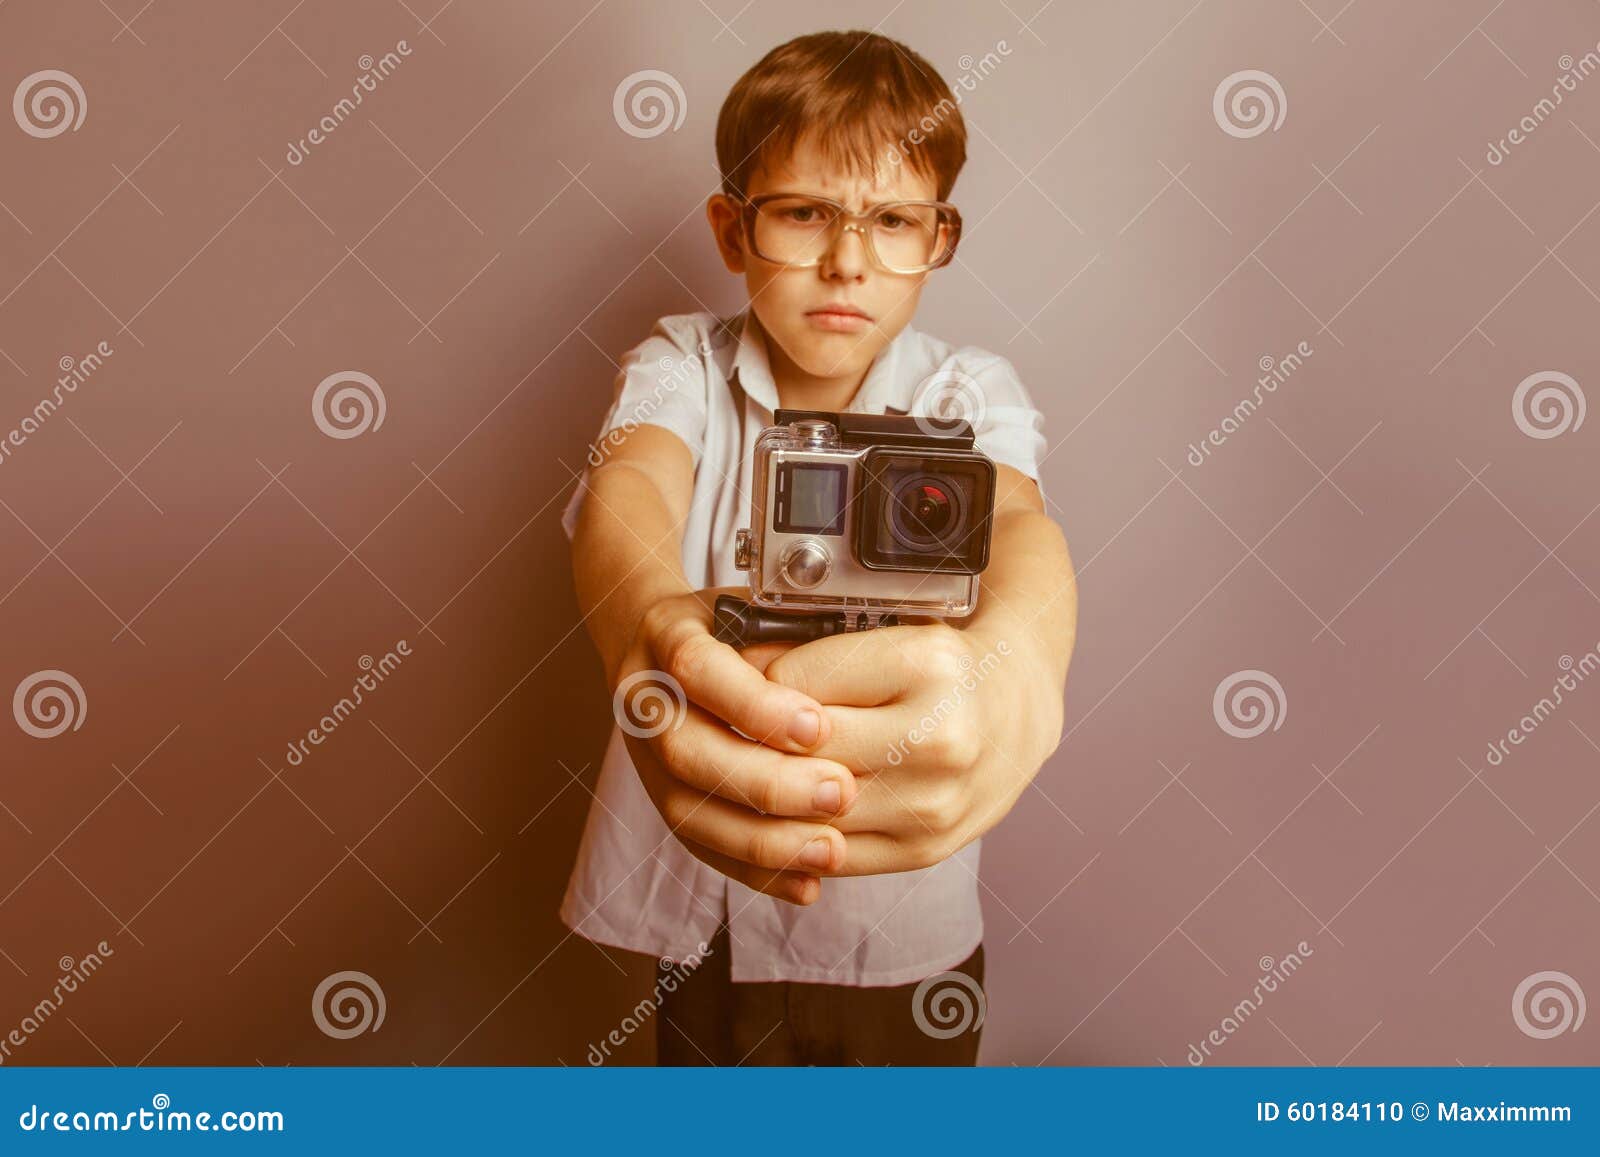 A Boy Of 10 Years Of European Appearance With Stock Photo 